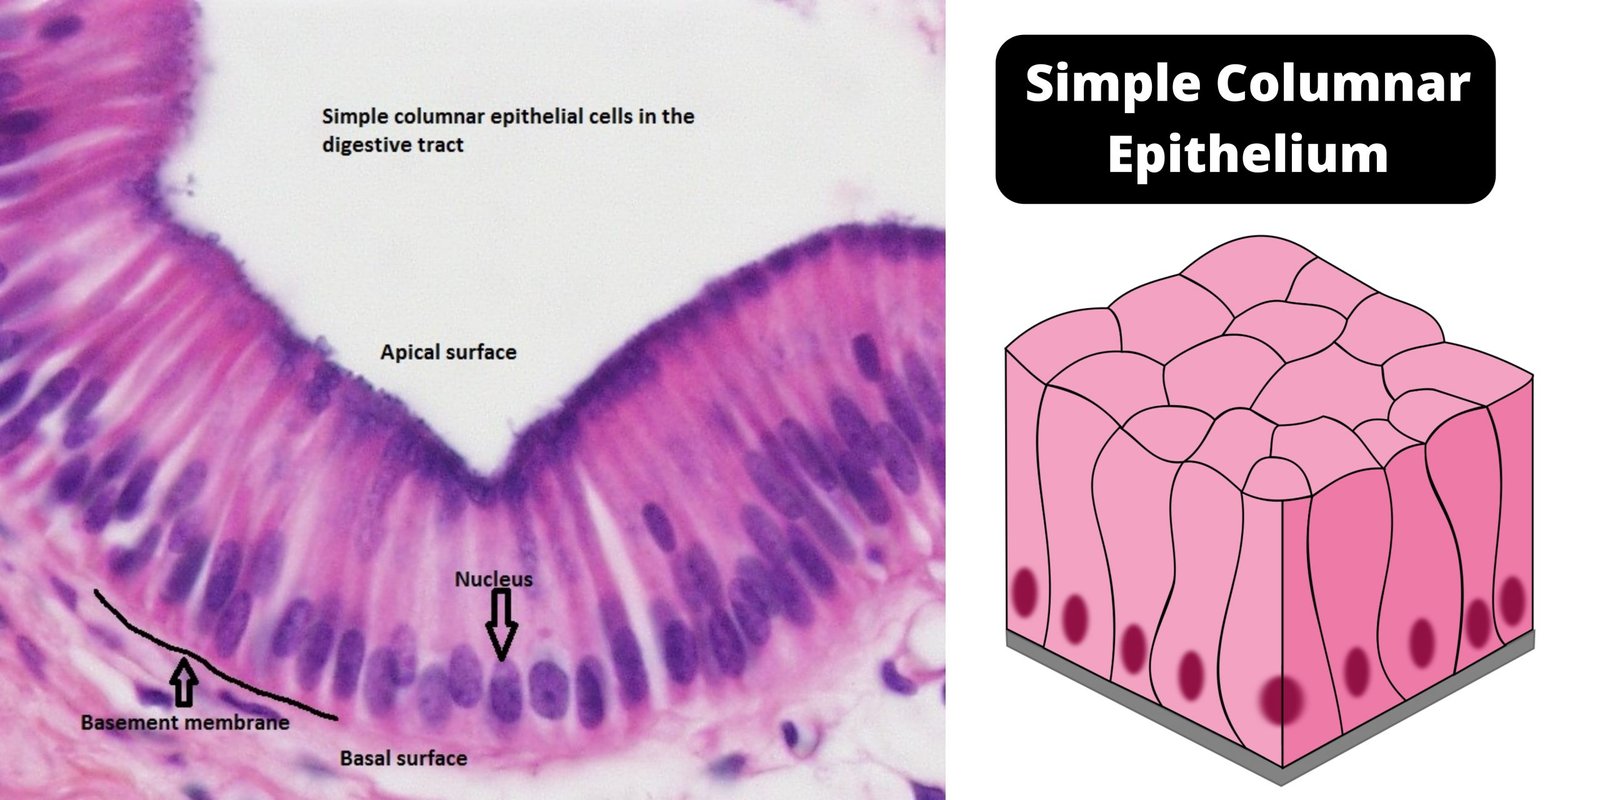 Simple columnar epithelium - definition, structure, functions, examples